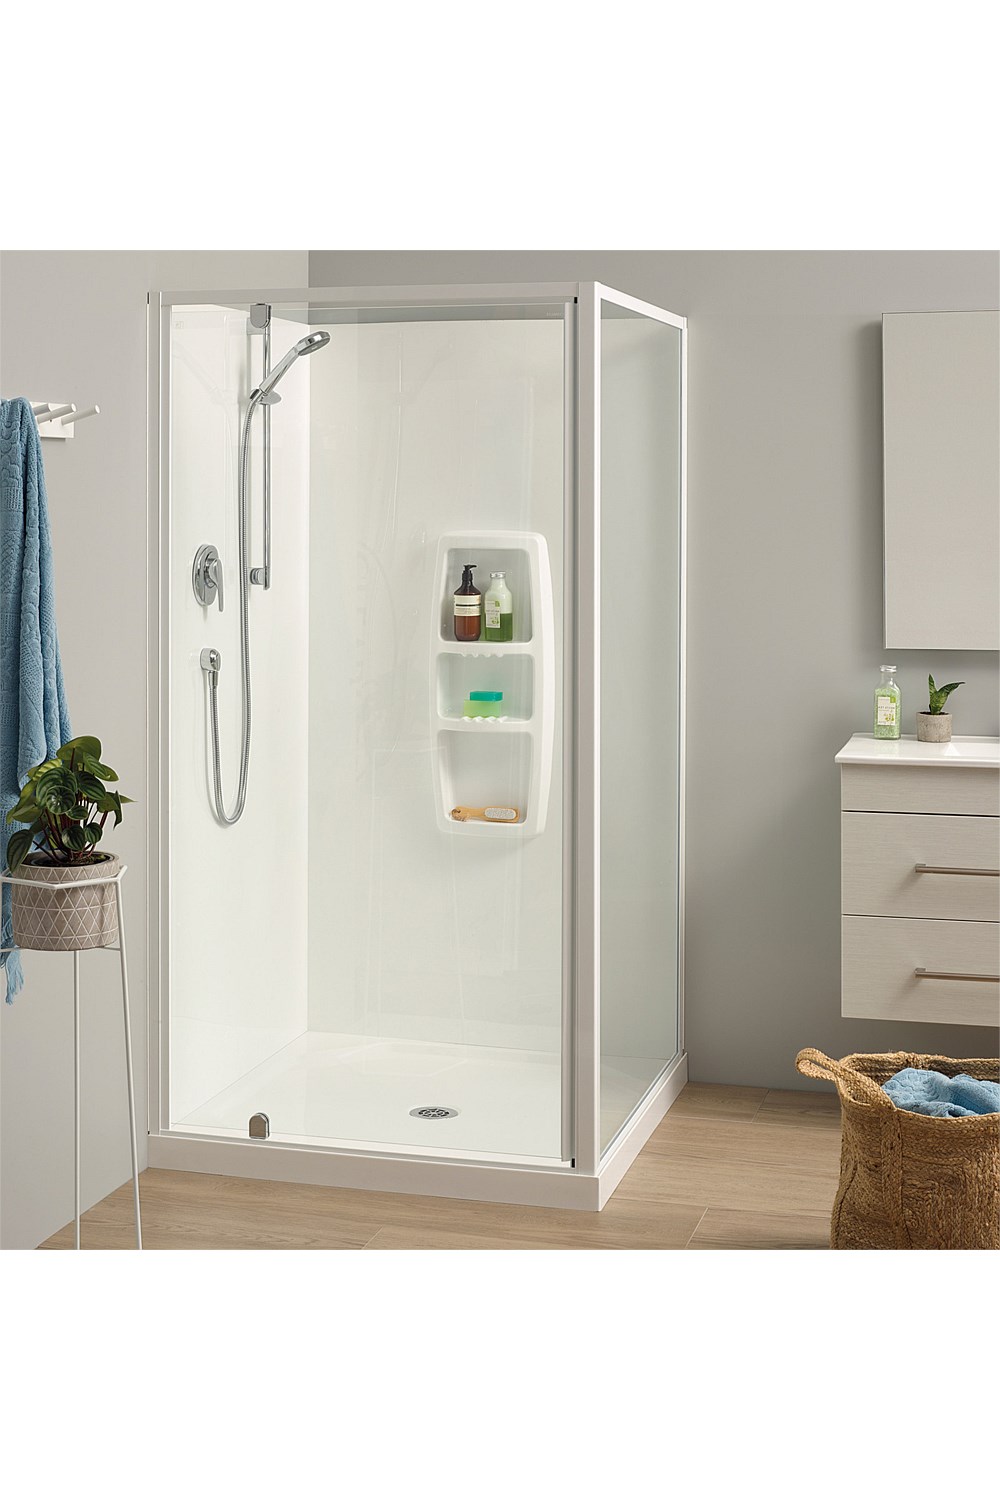 Showers | Plumbing World - Clearlite Sierra 1000mm 2 Sided Square